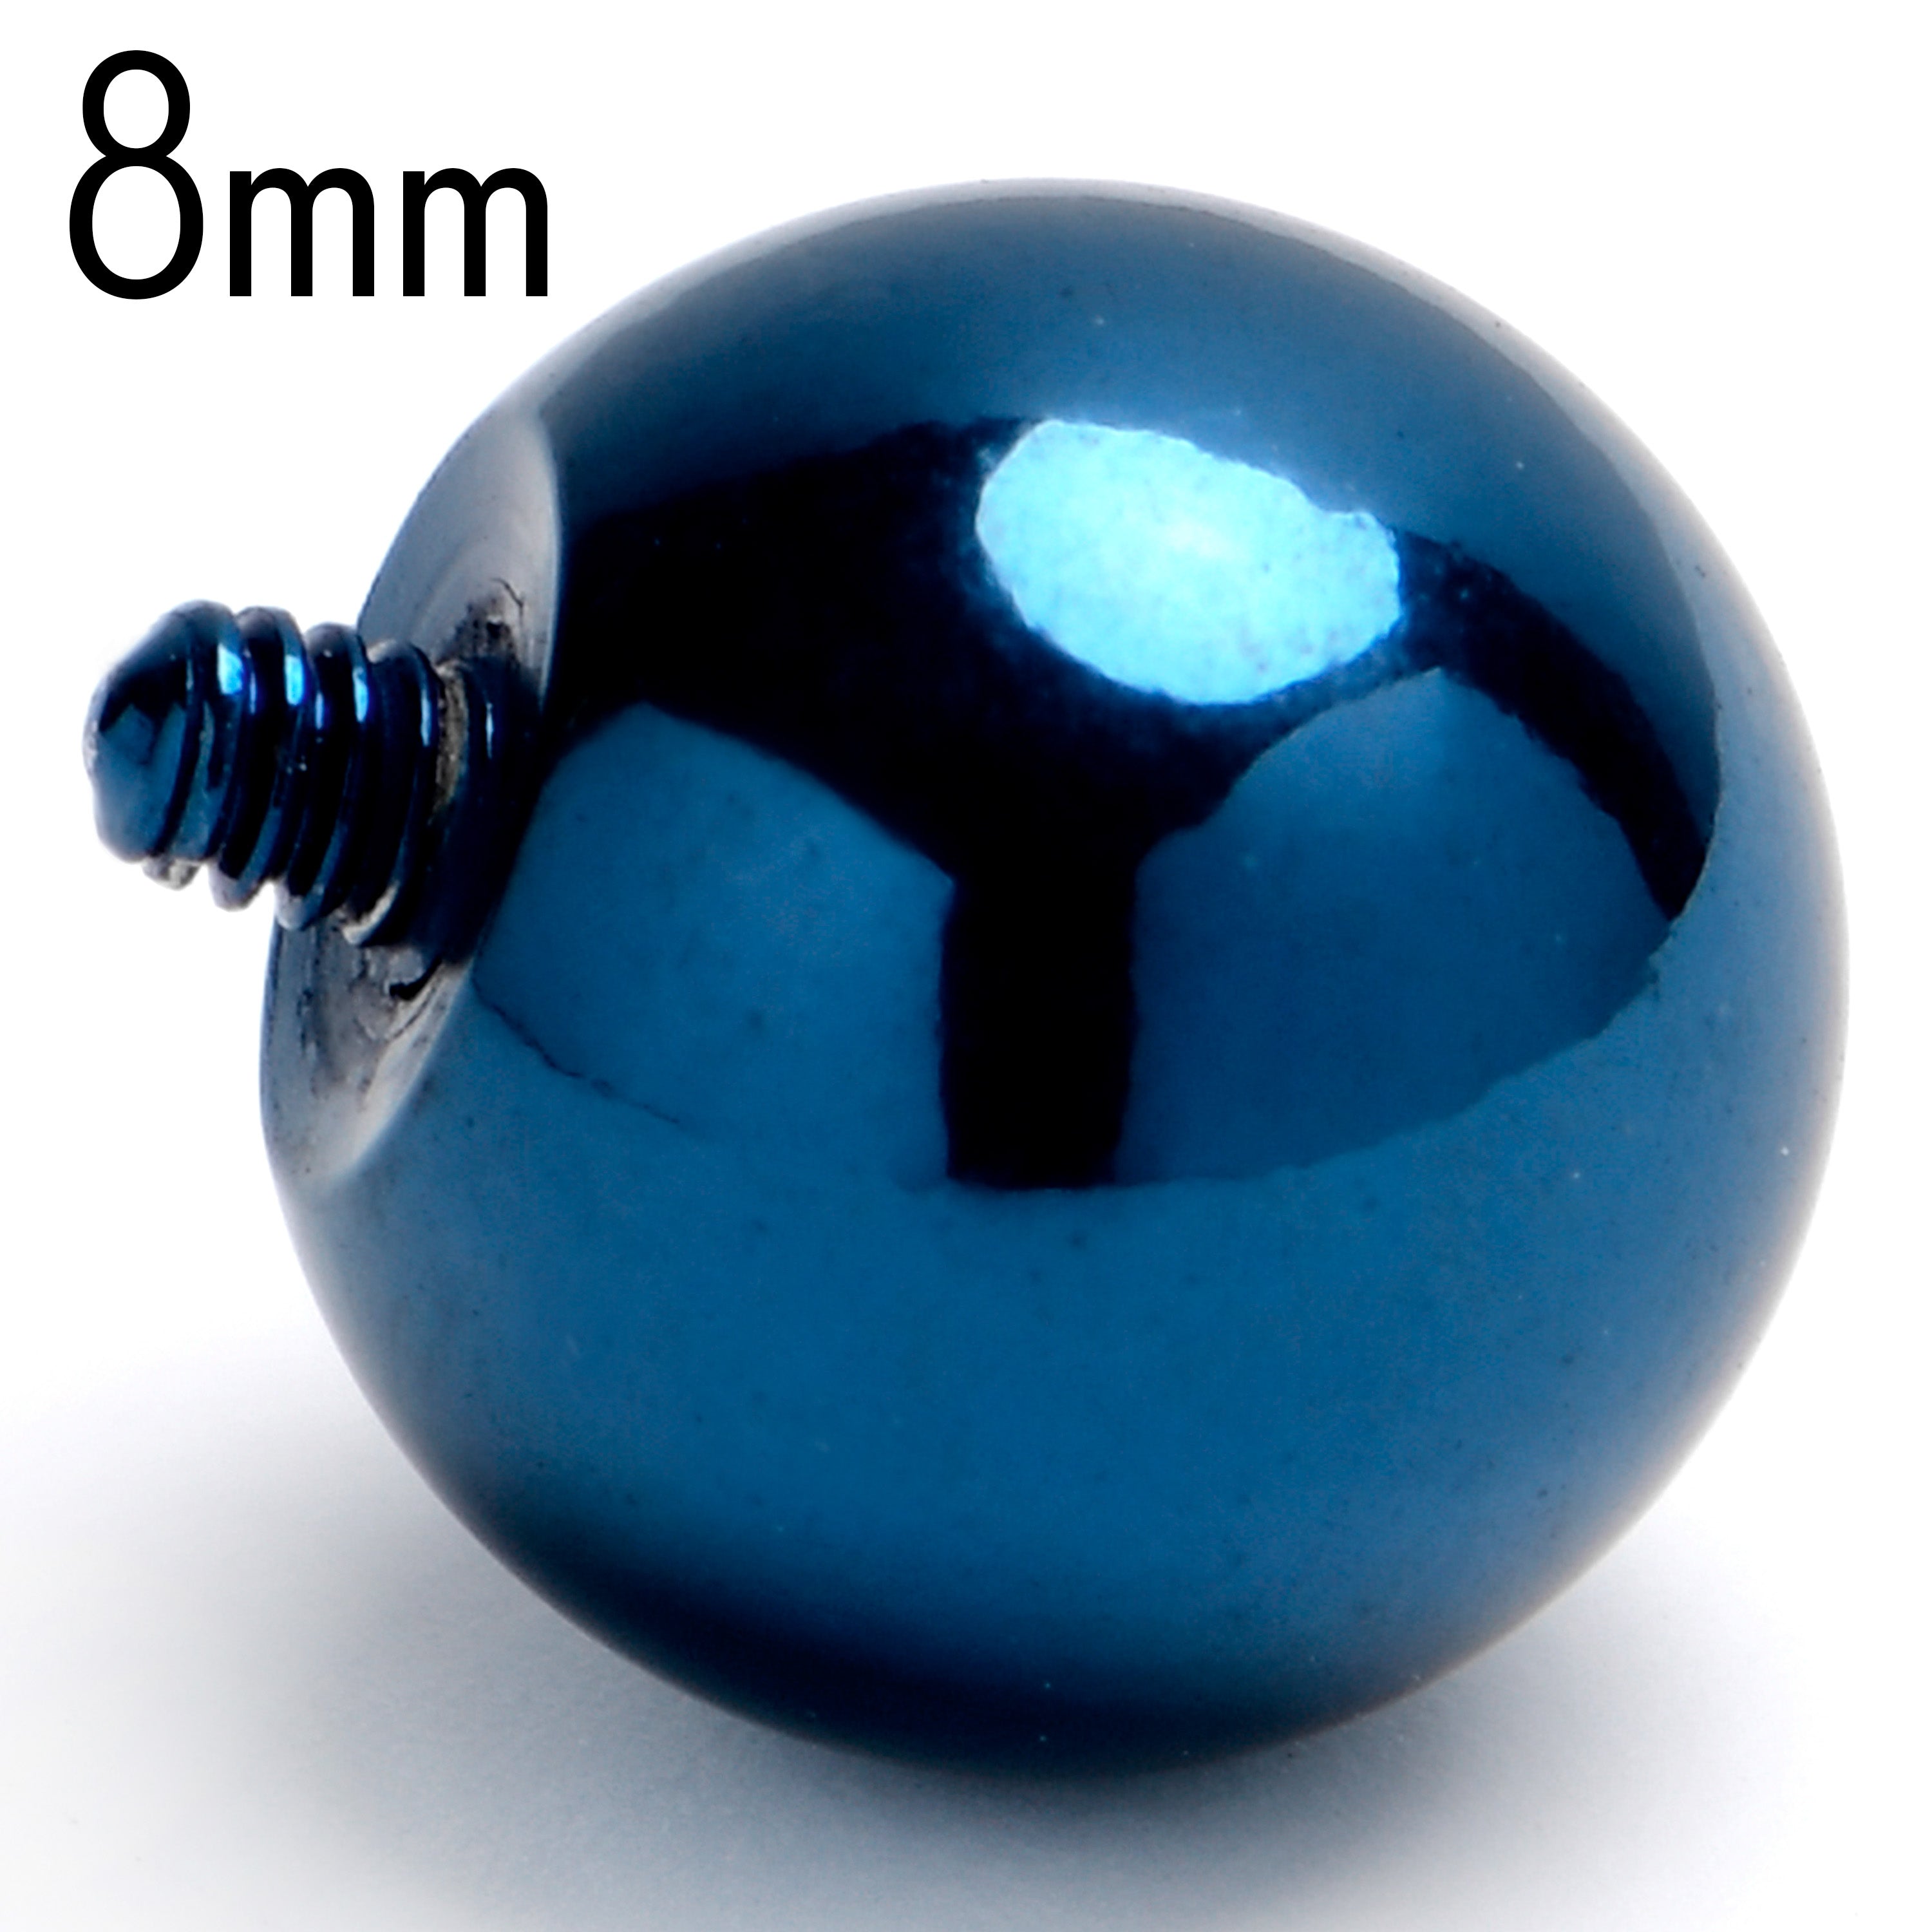 14 Gauge 8mm Blue Replacement Ball End Internally Threaded Jewelry